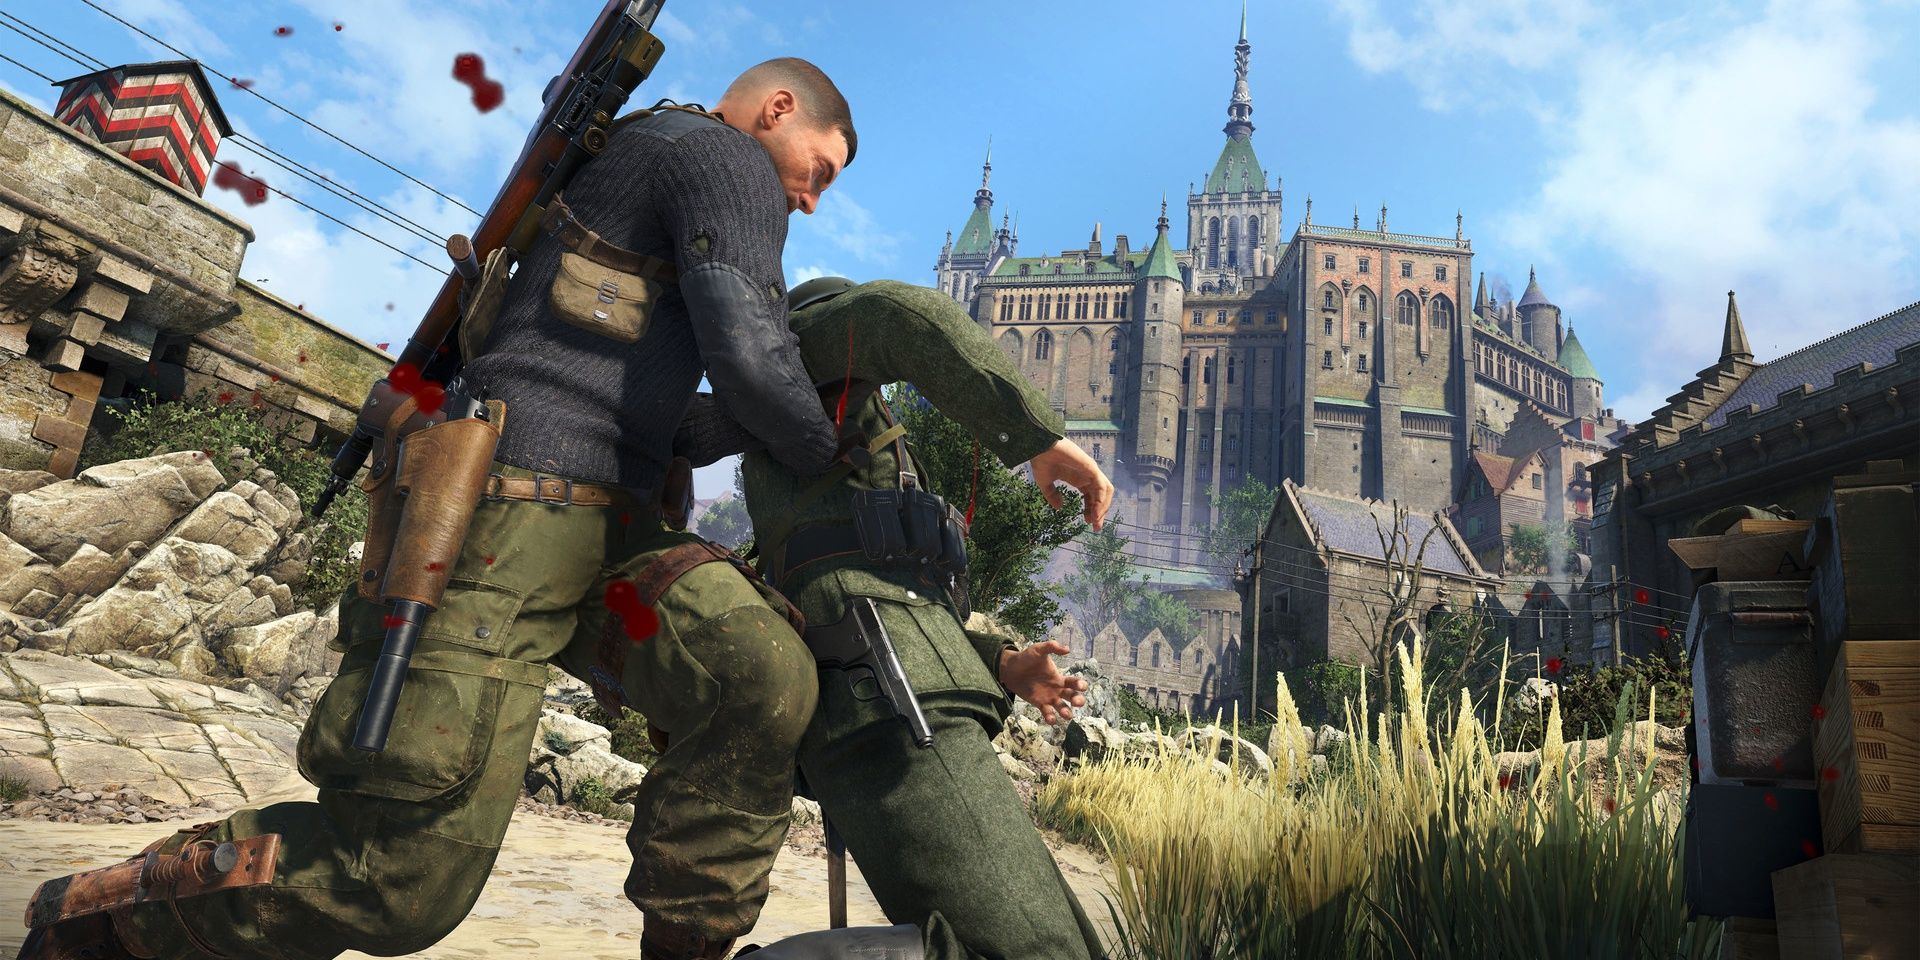 Sniper Elite 5 Non-Lethal showing the main character taking out someone in a non-lethal way